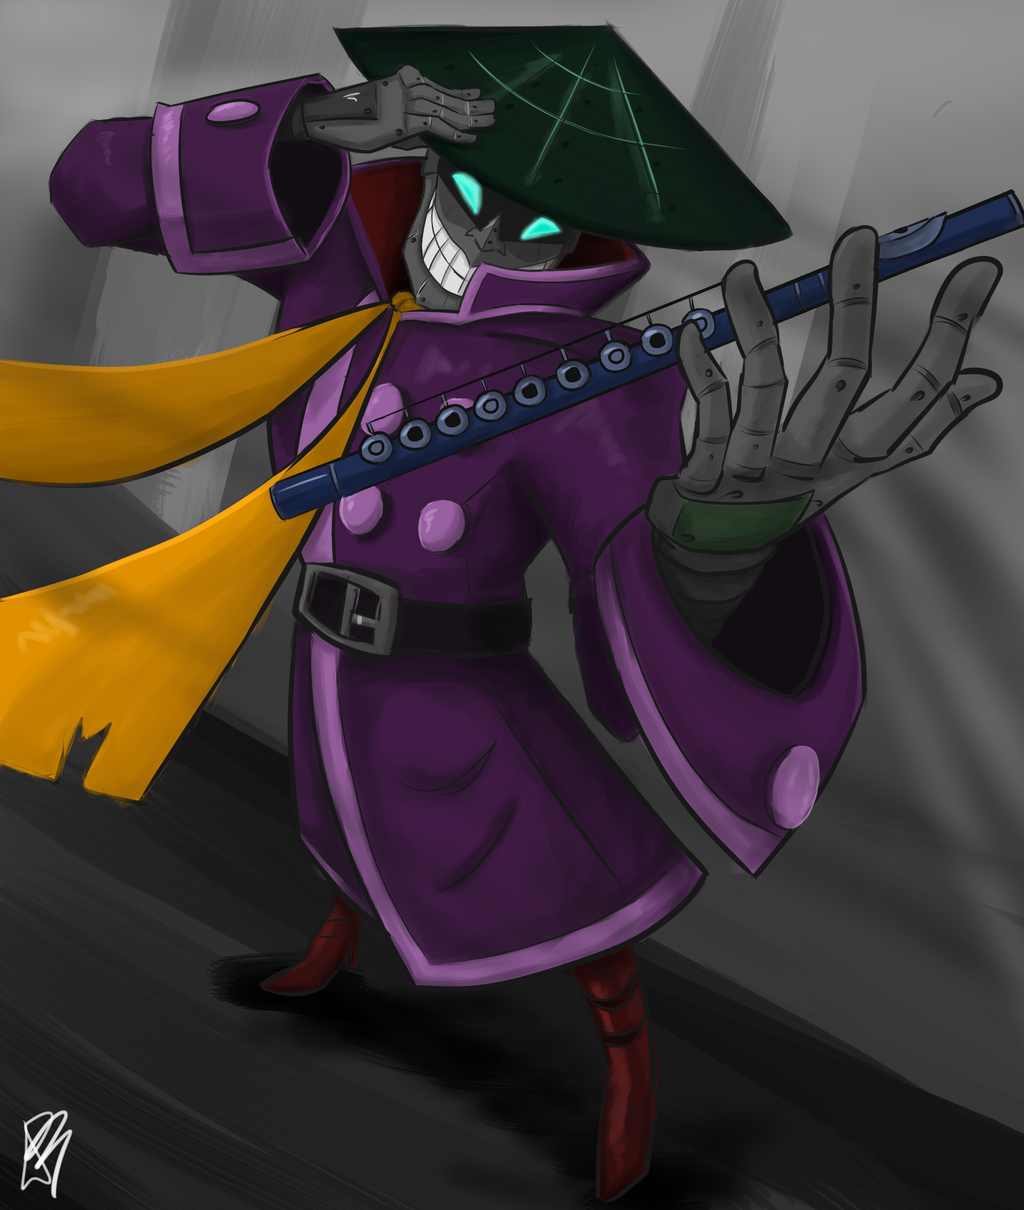 scaramouche_the_merciless_by_leleyume-db30ooi.png